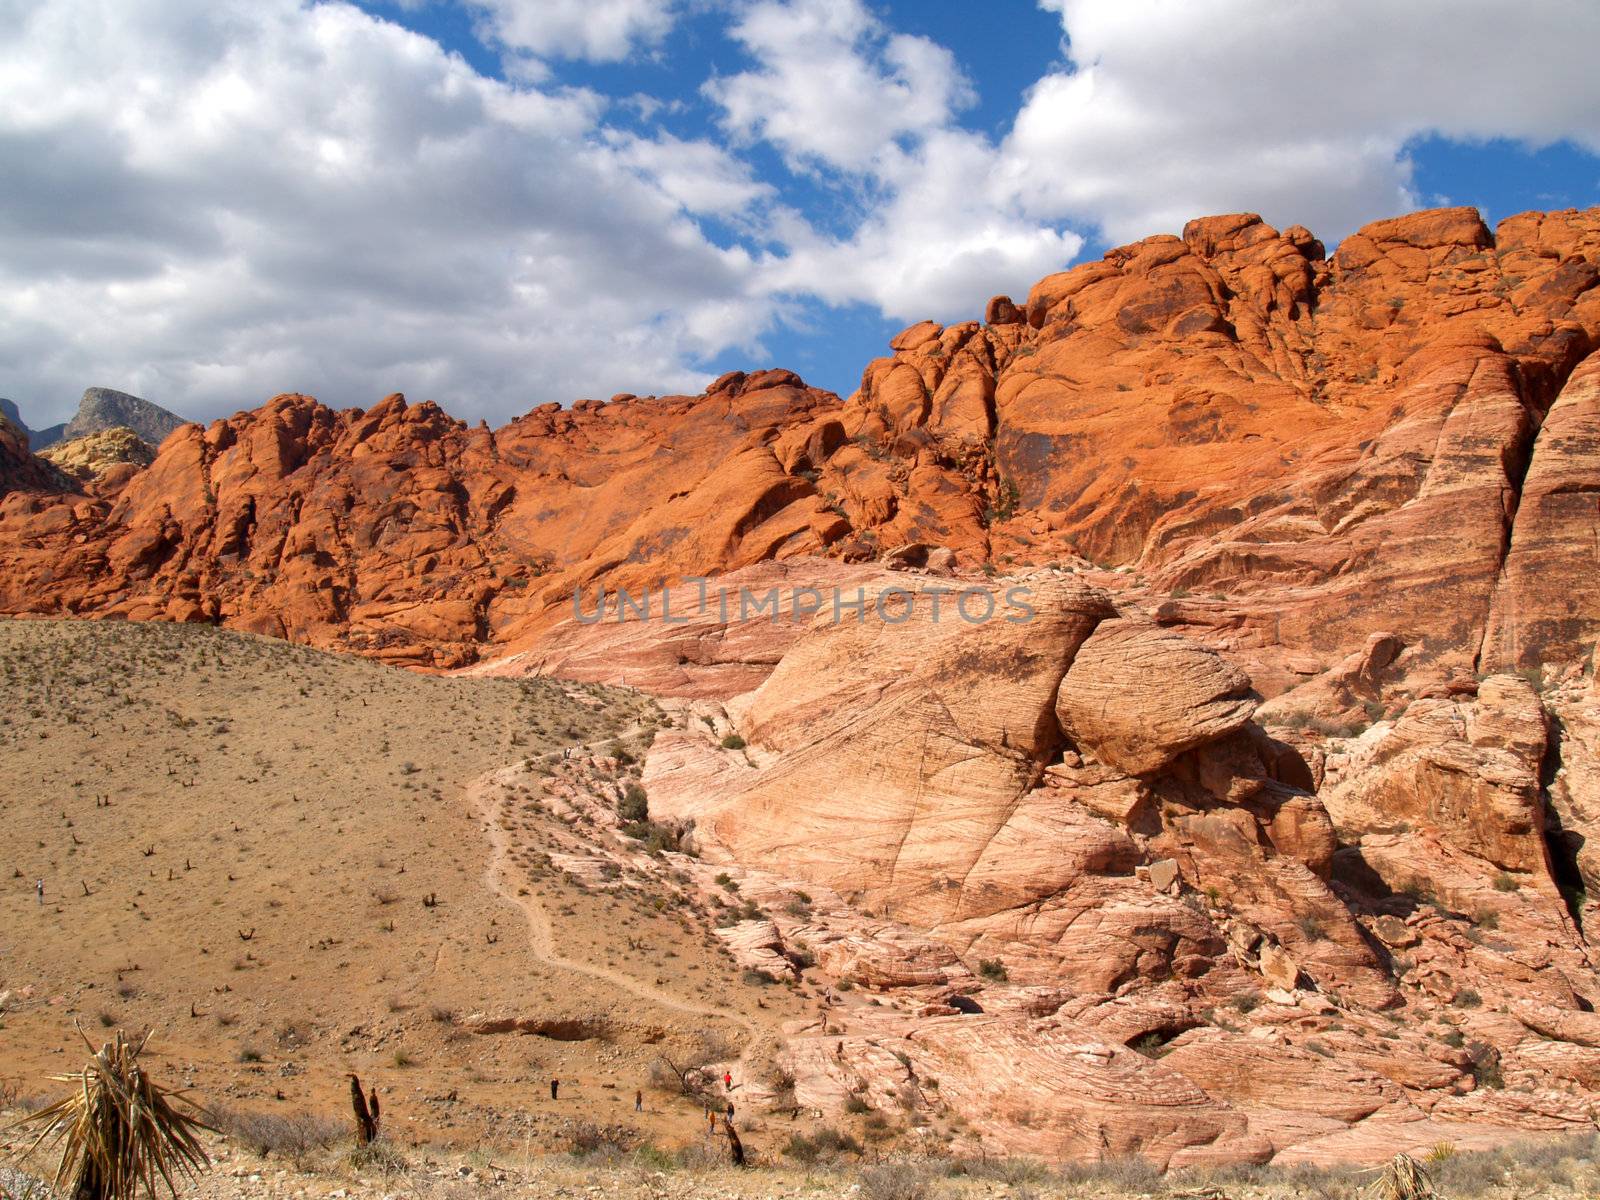 A view of Red Rock Canyon National Conservation Area.